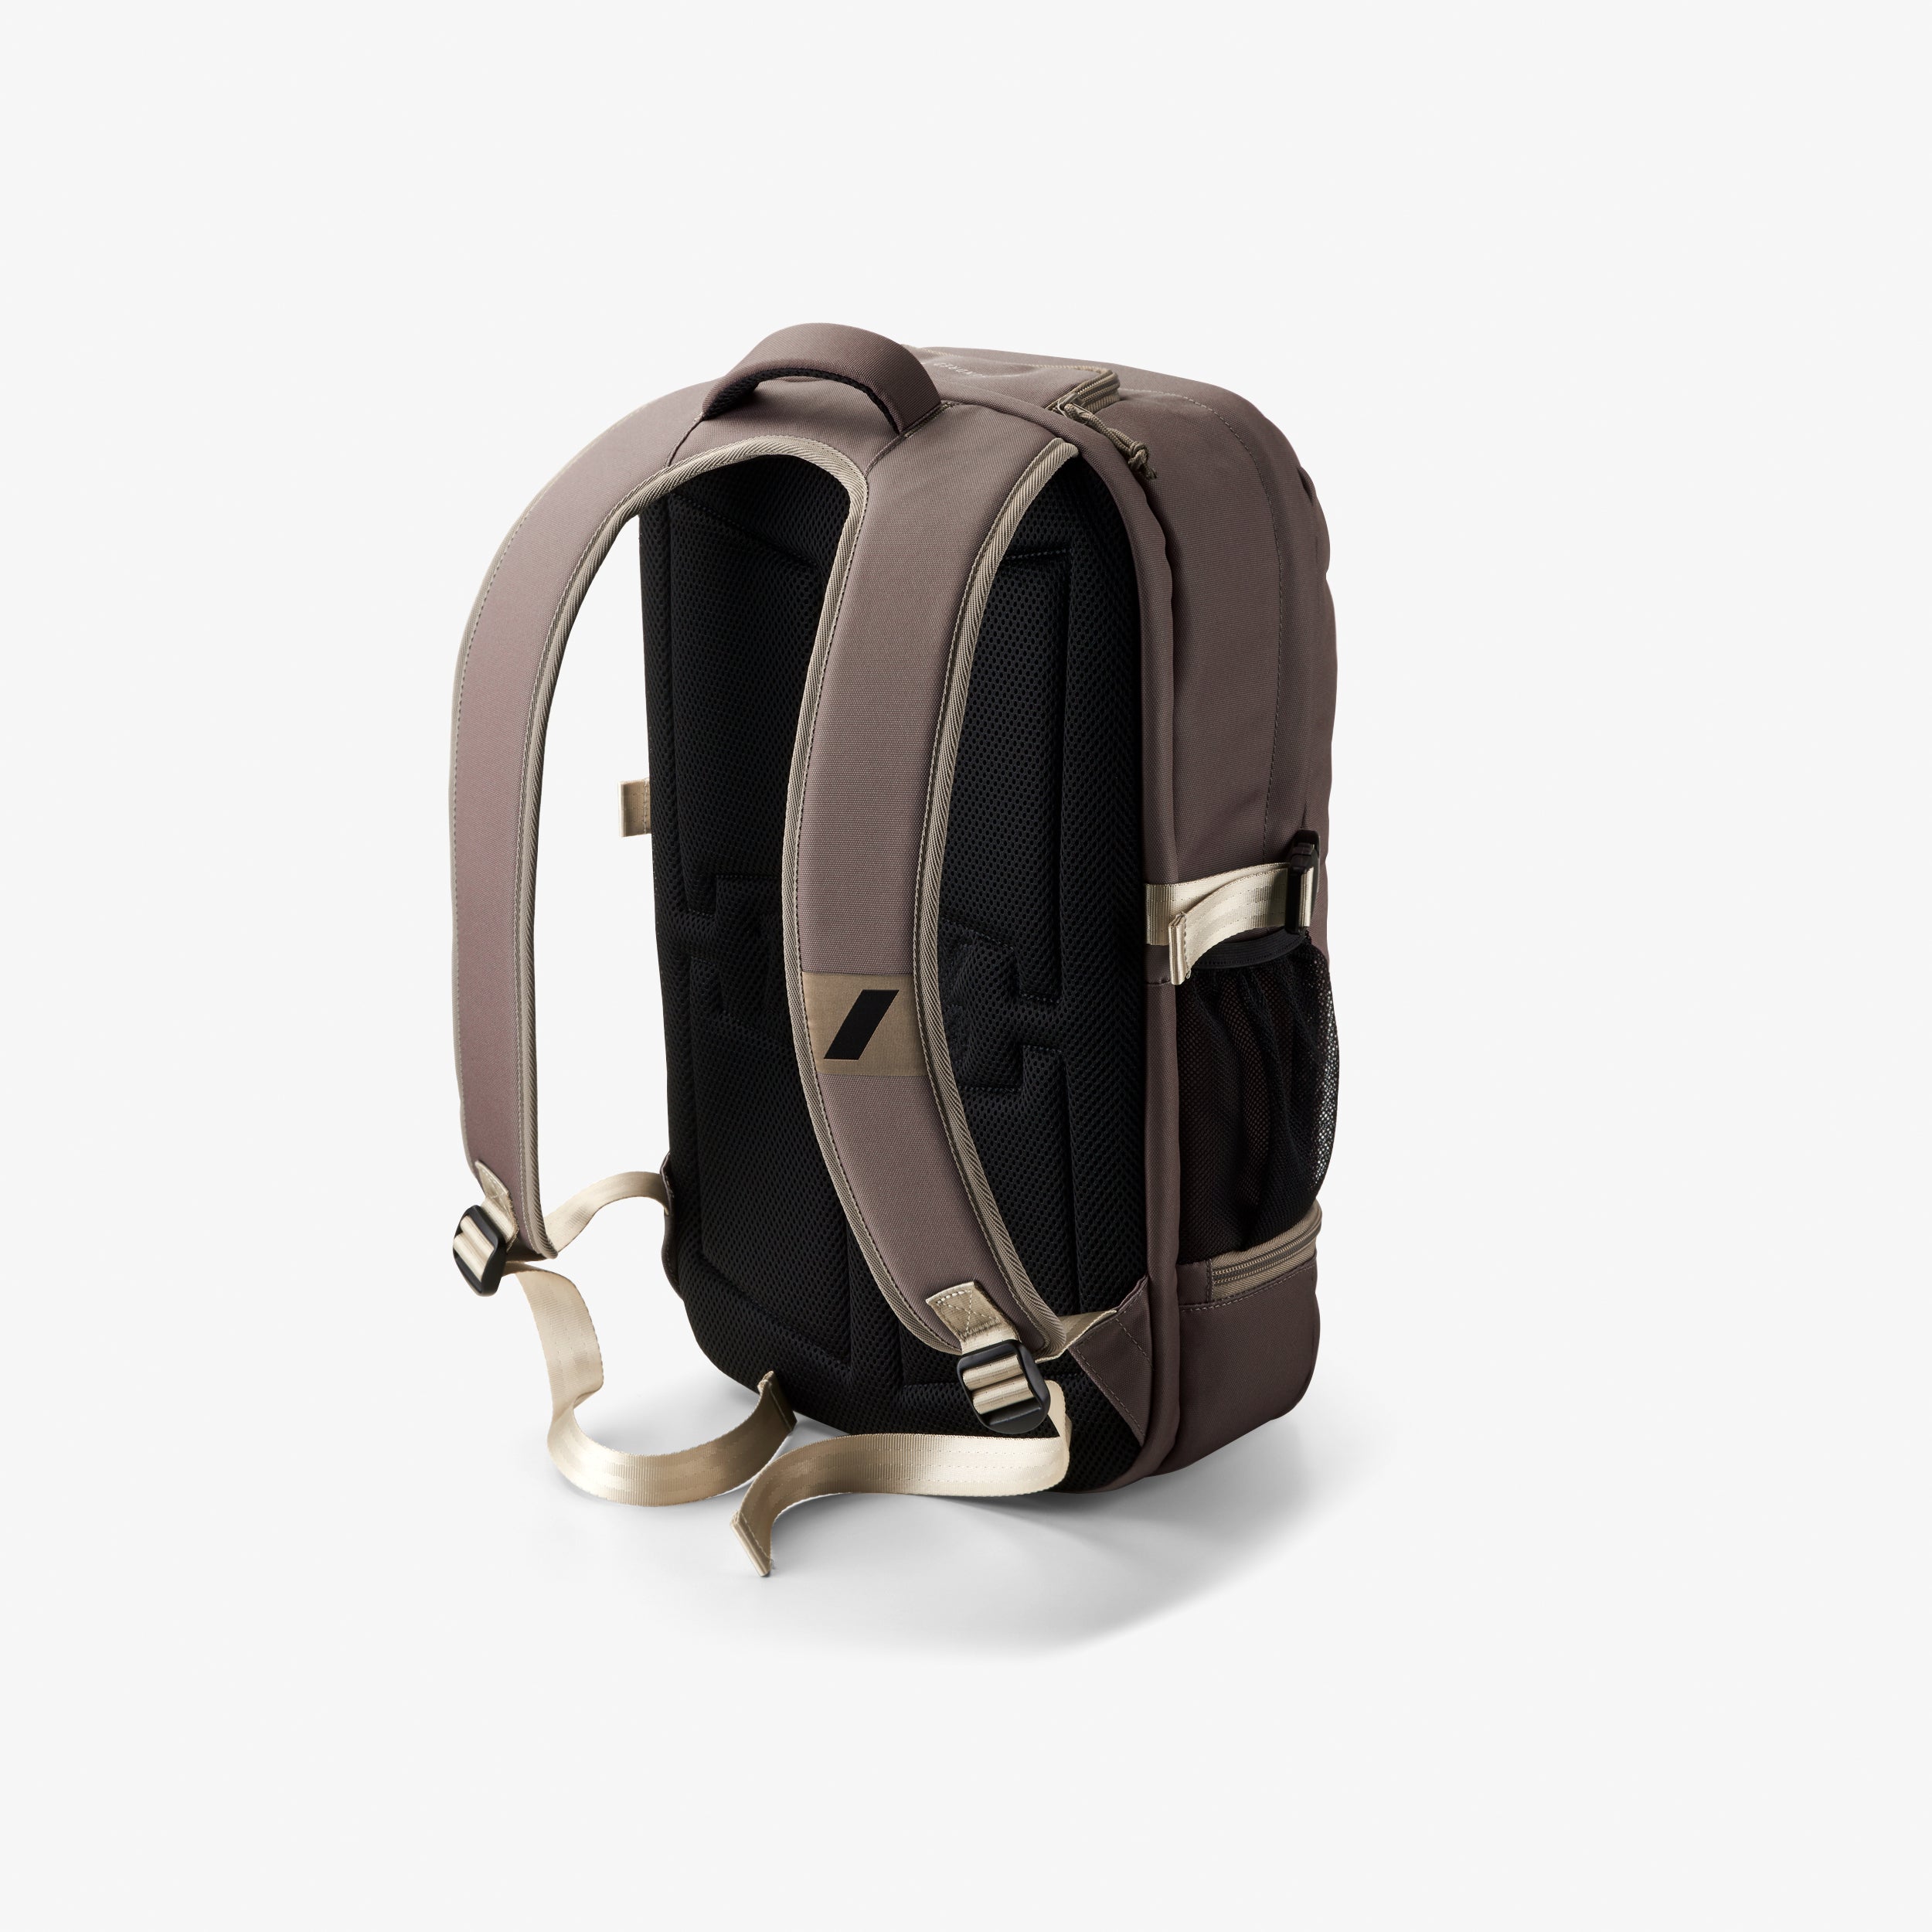 TRANSIT Backpack Warm Grey - Secondary